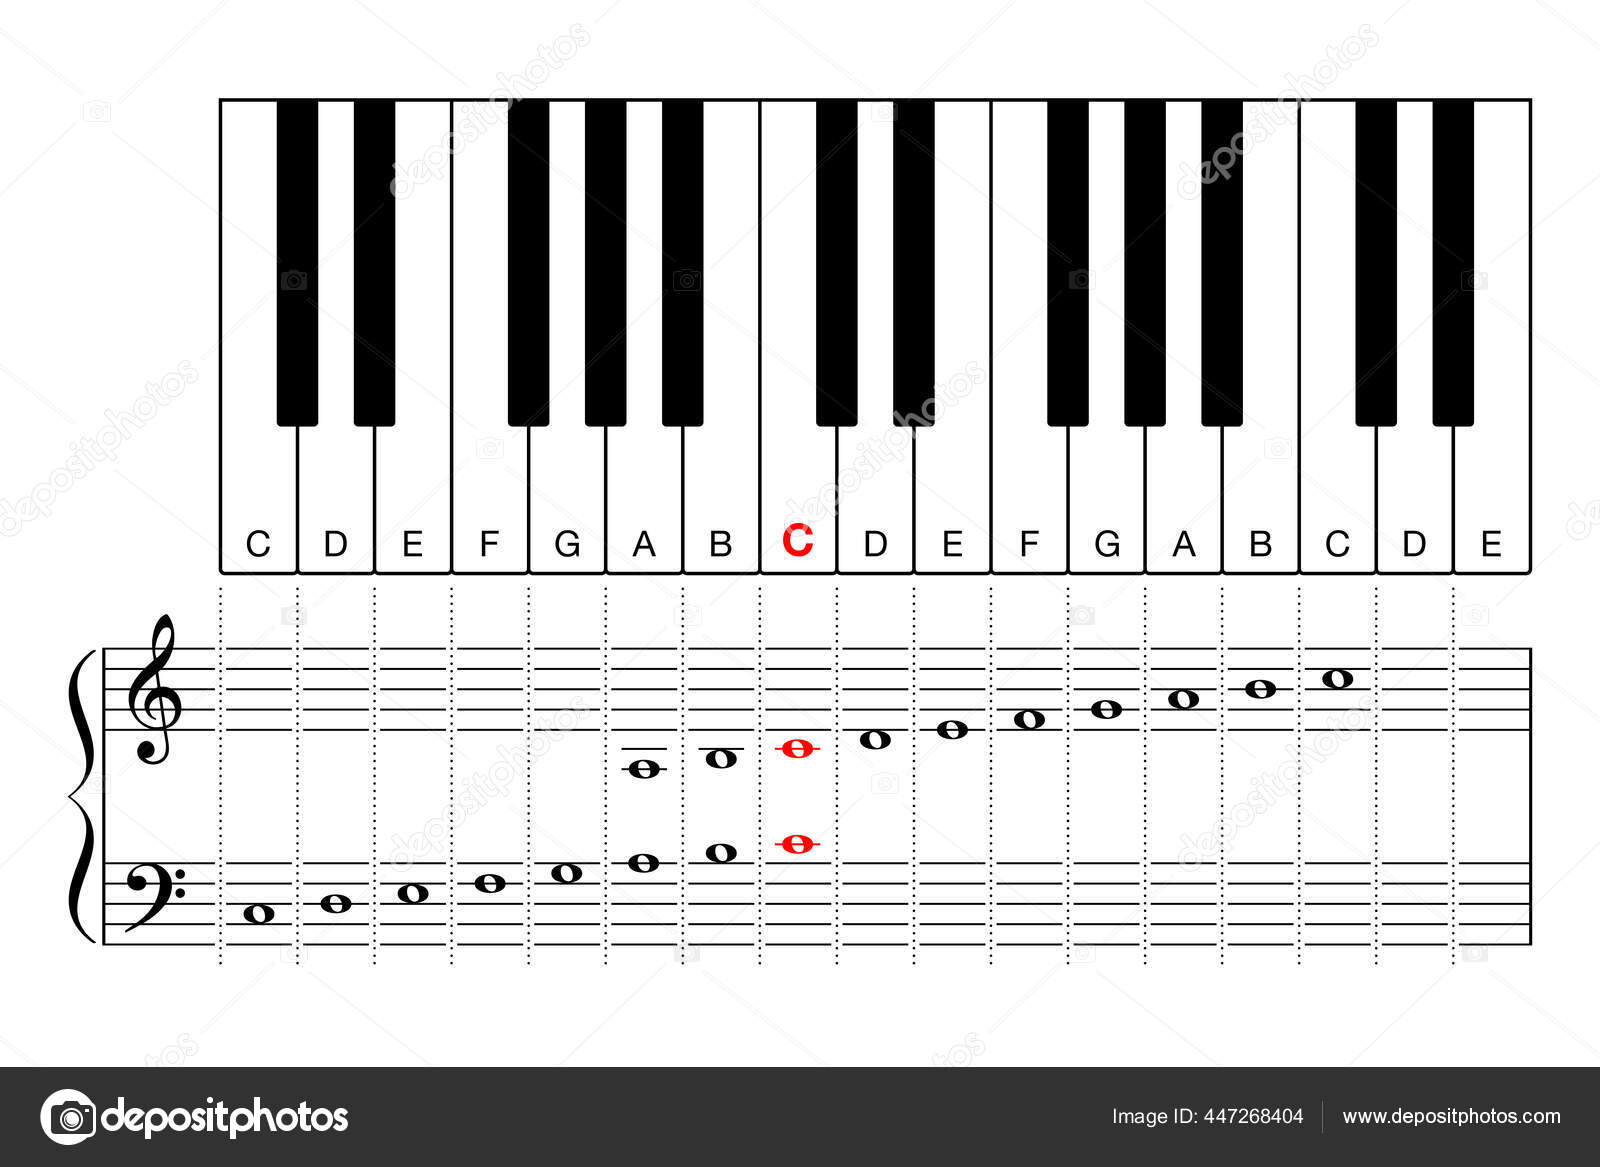 The E Flat Major Scale on Piano, Treble and Bass Clef